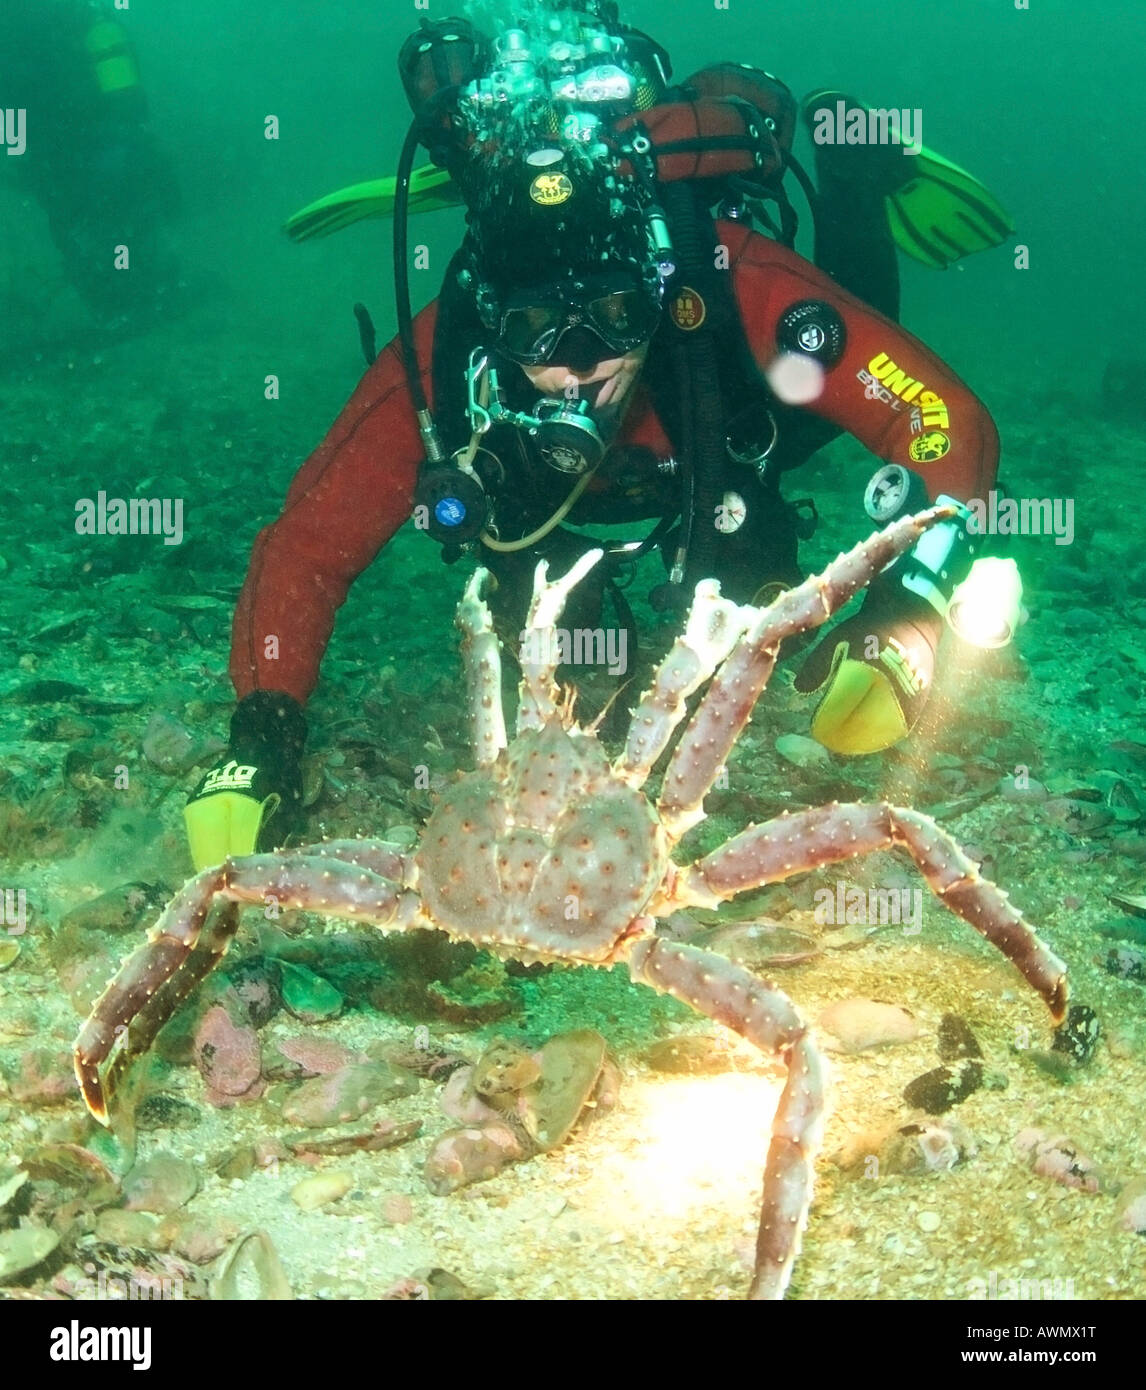 Red king crab (Paralithodes camtschatica) and diver. Barents Sea, Russia Stock Photo